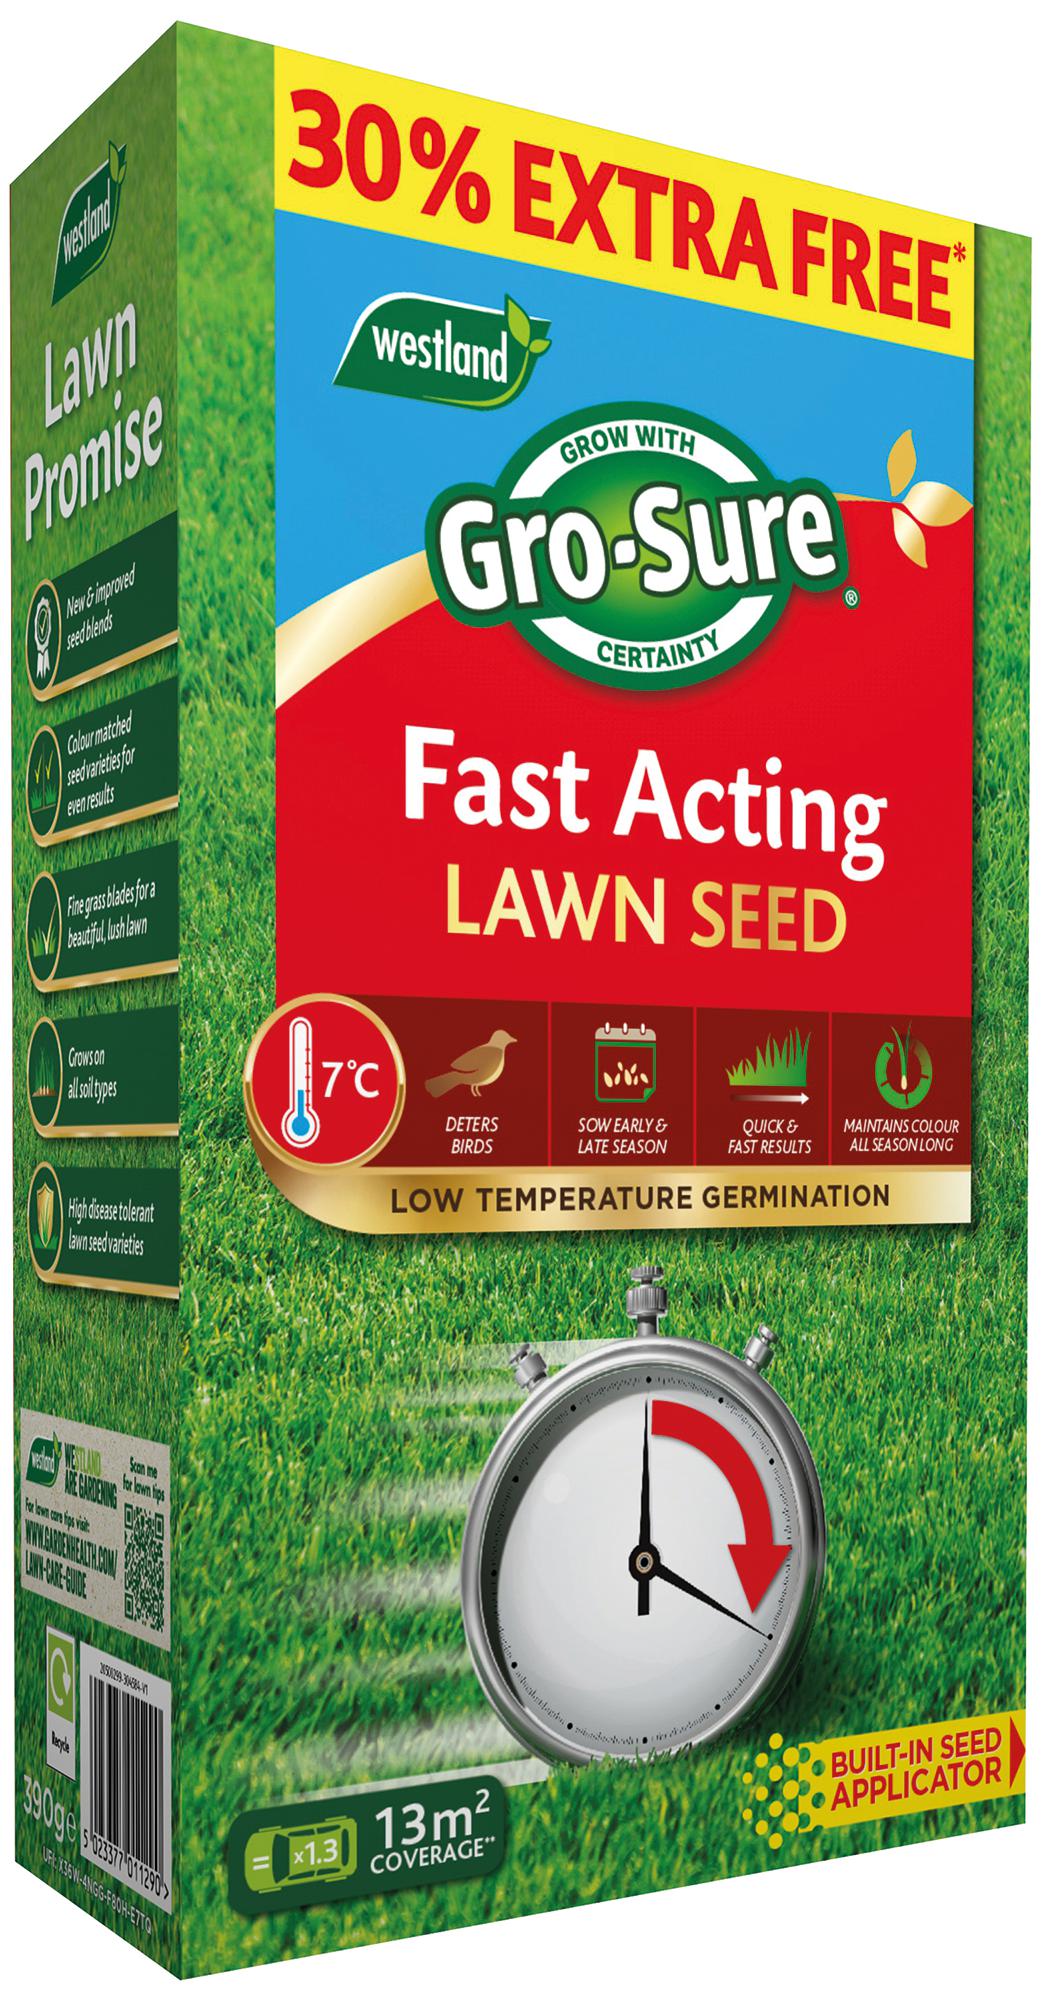 Tesco even have lawn seed for just a fiver right now